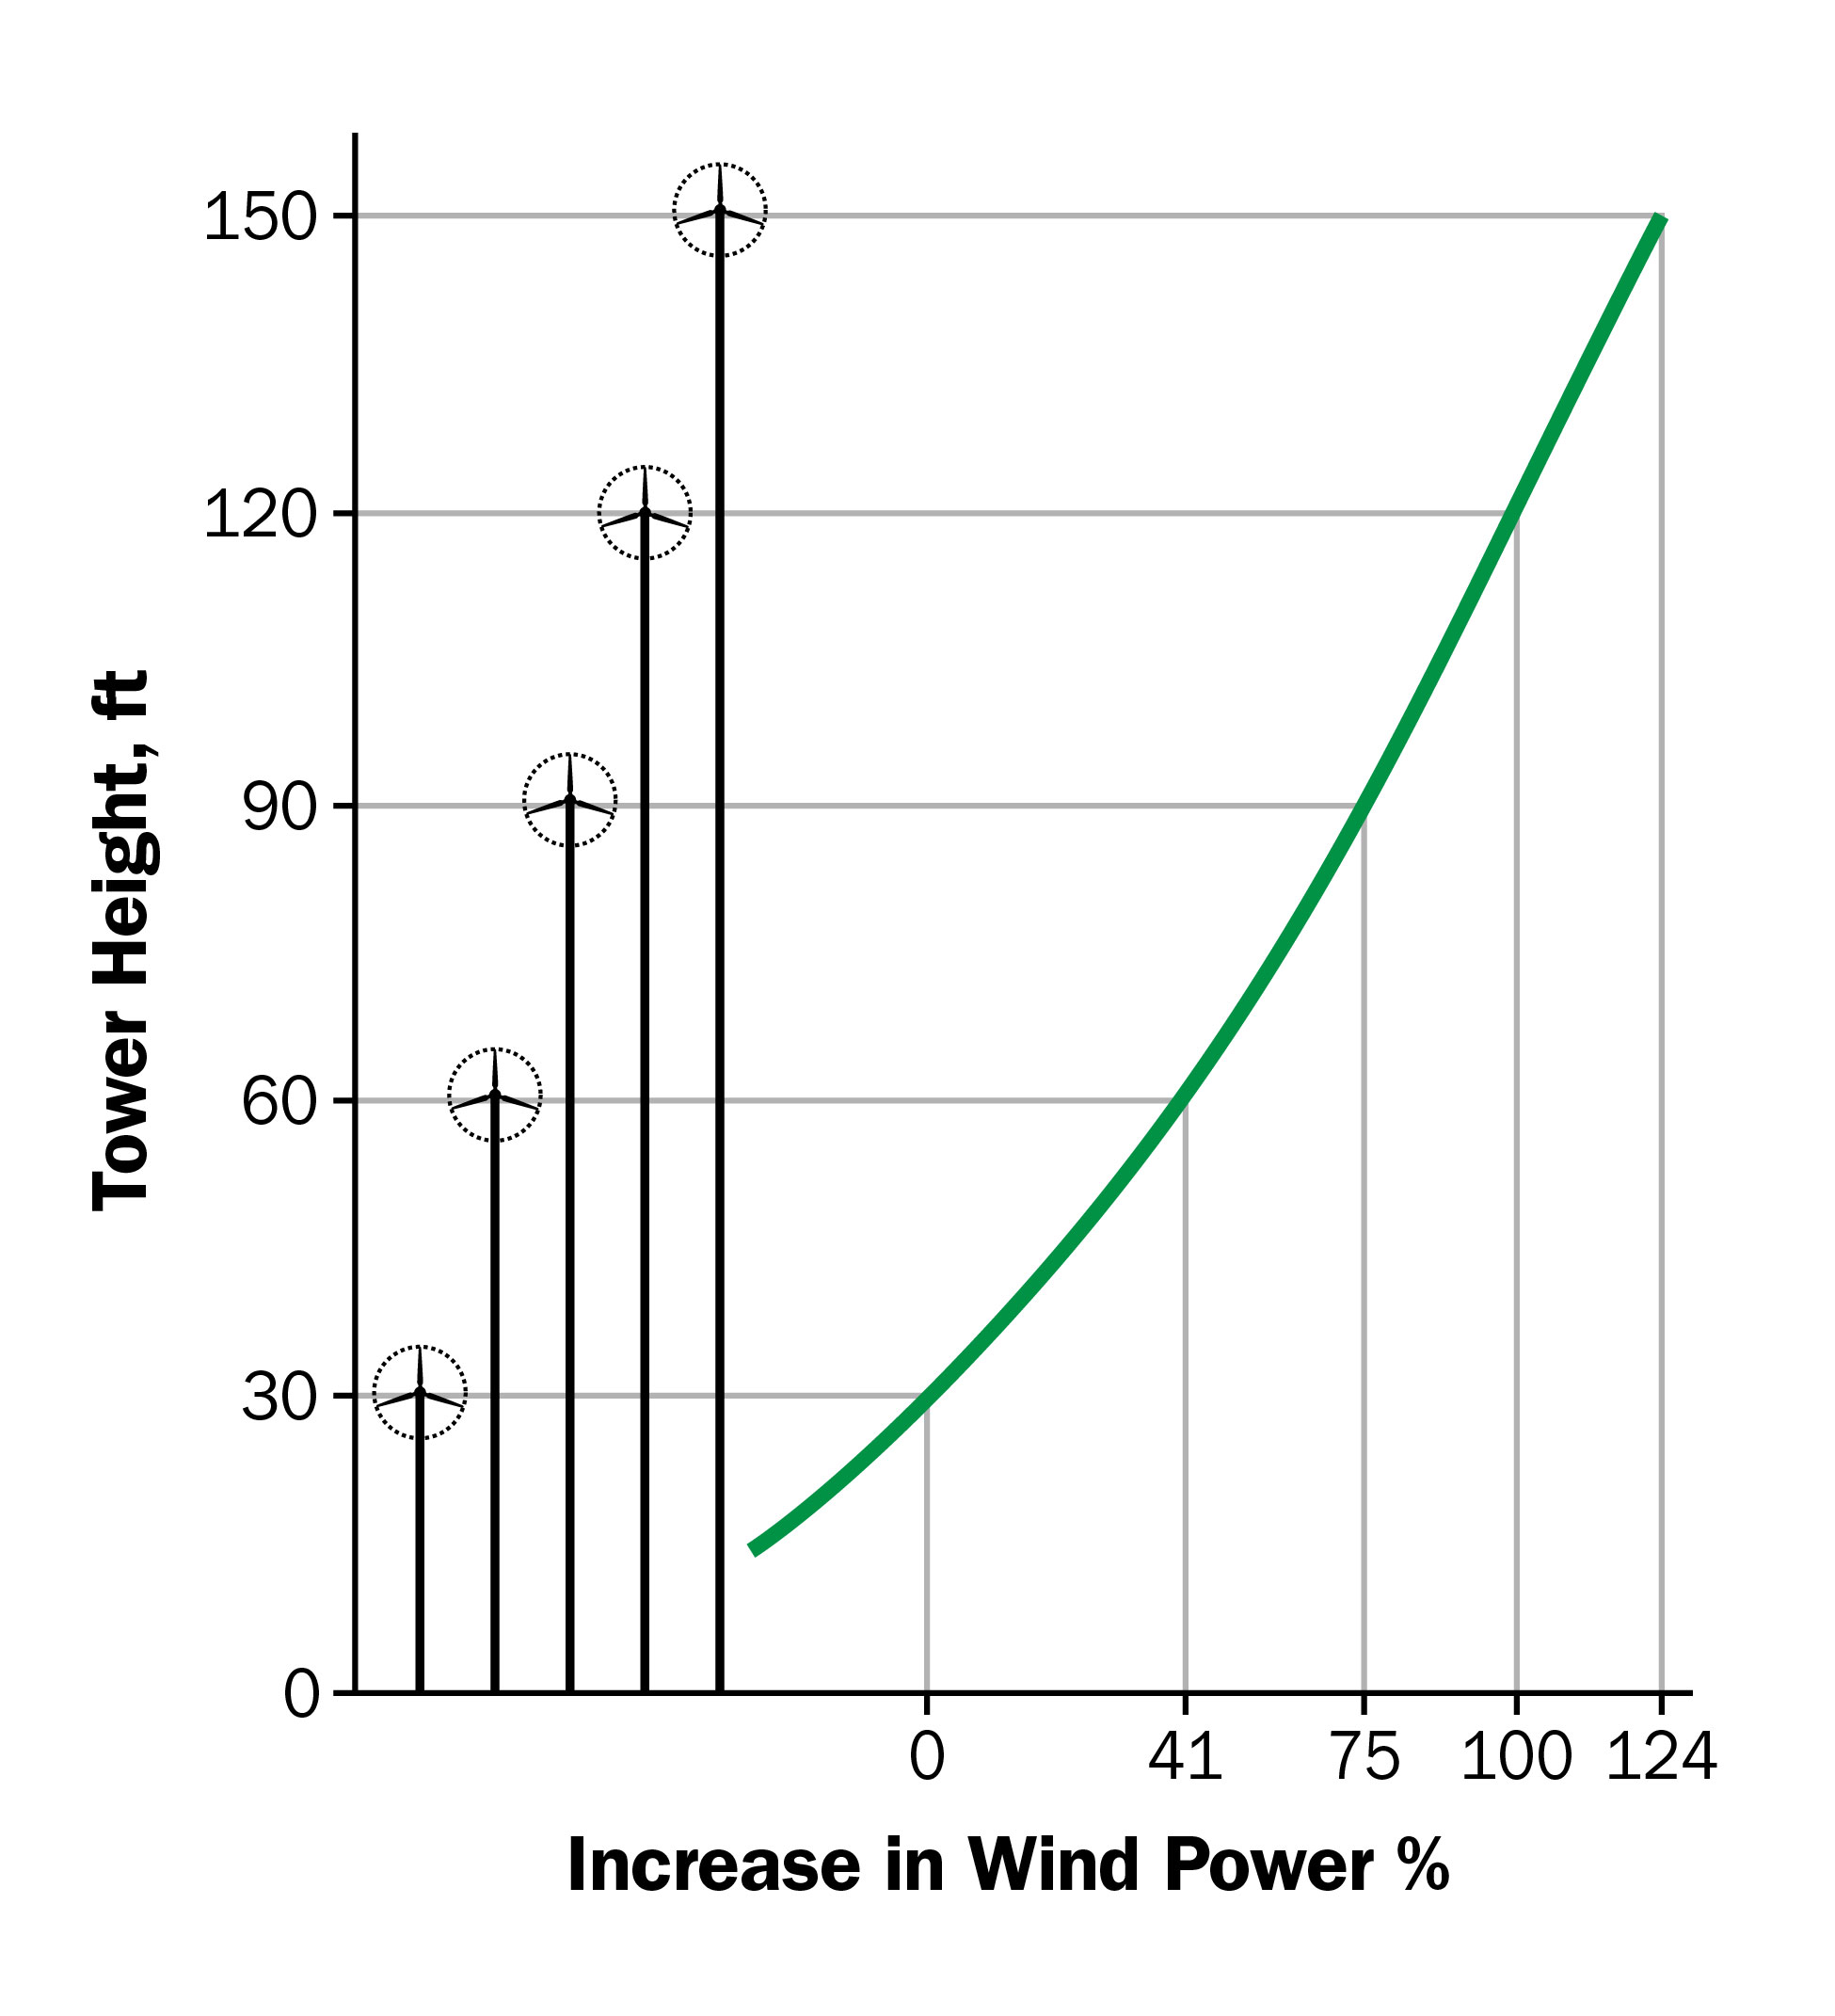 Chart showing wind power increases with the height of the wind tower